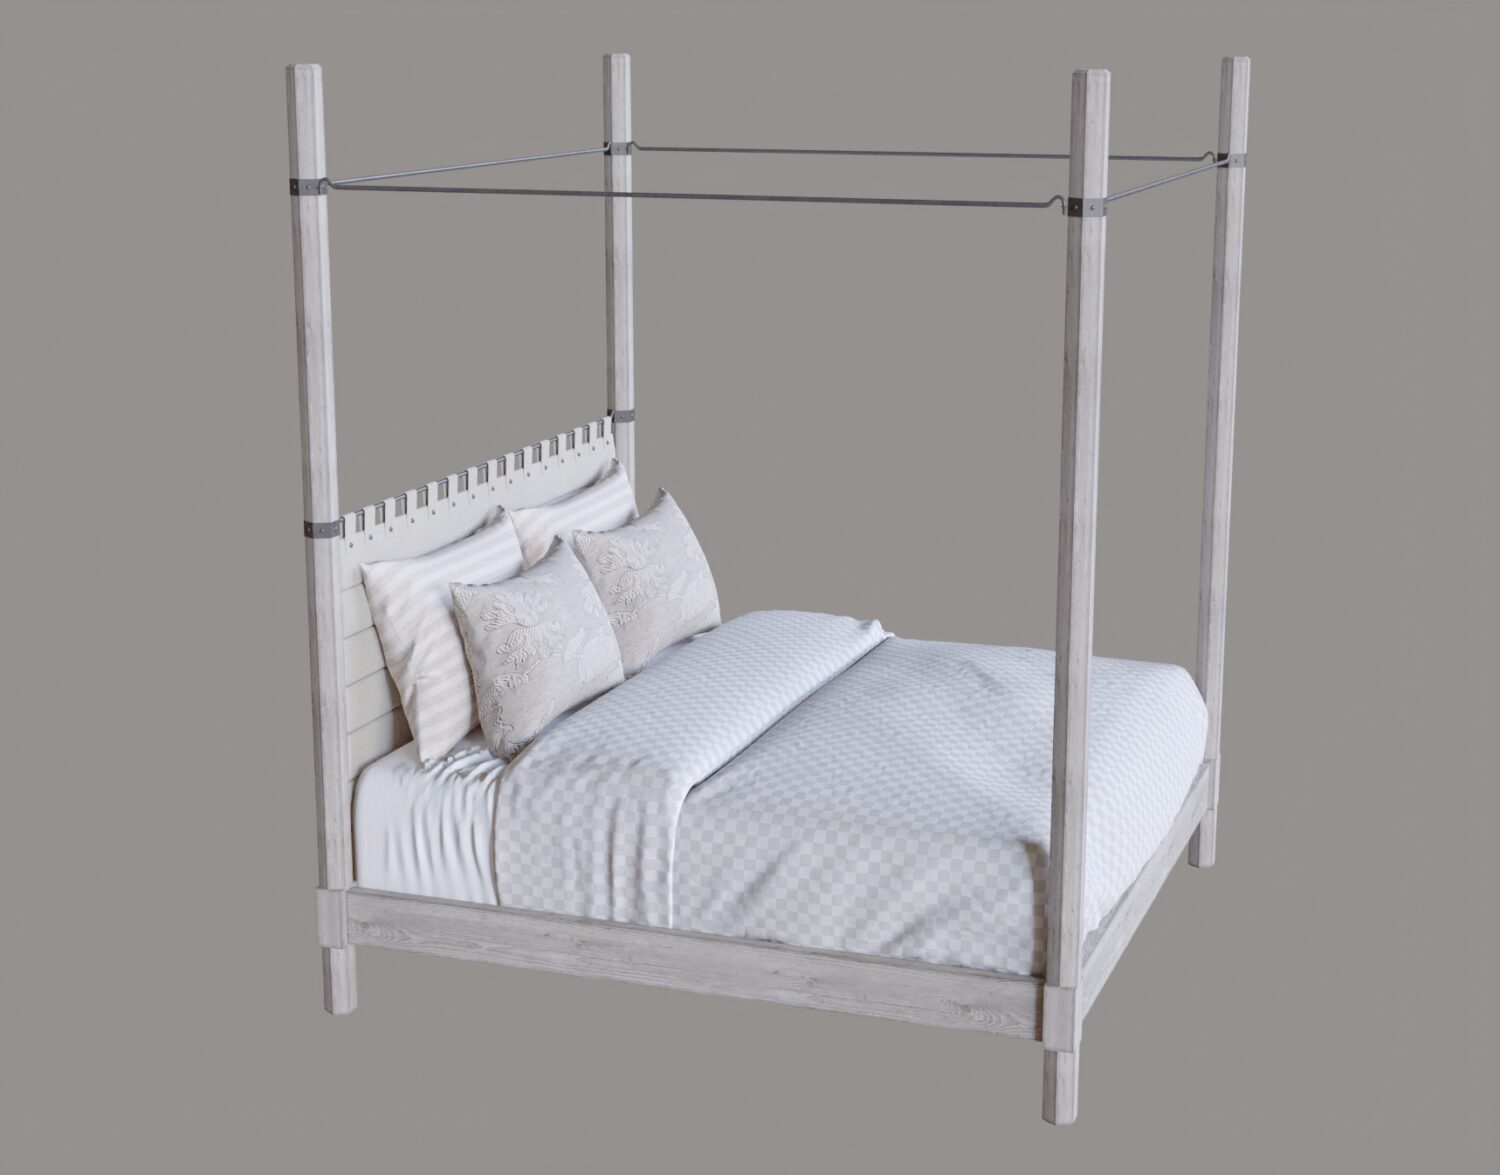 10873. Download Free Bed Model By Nguyen Quan